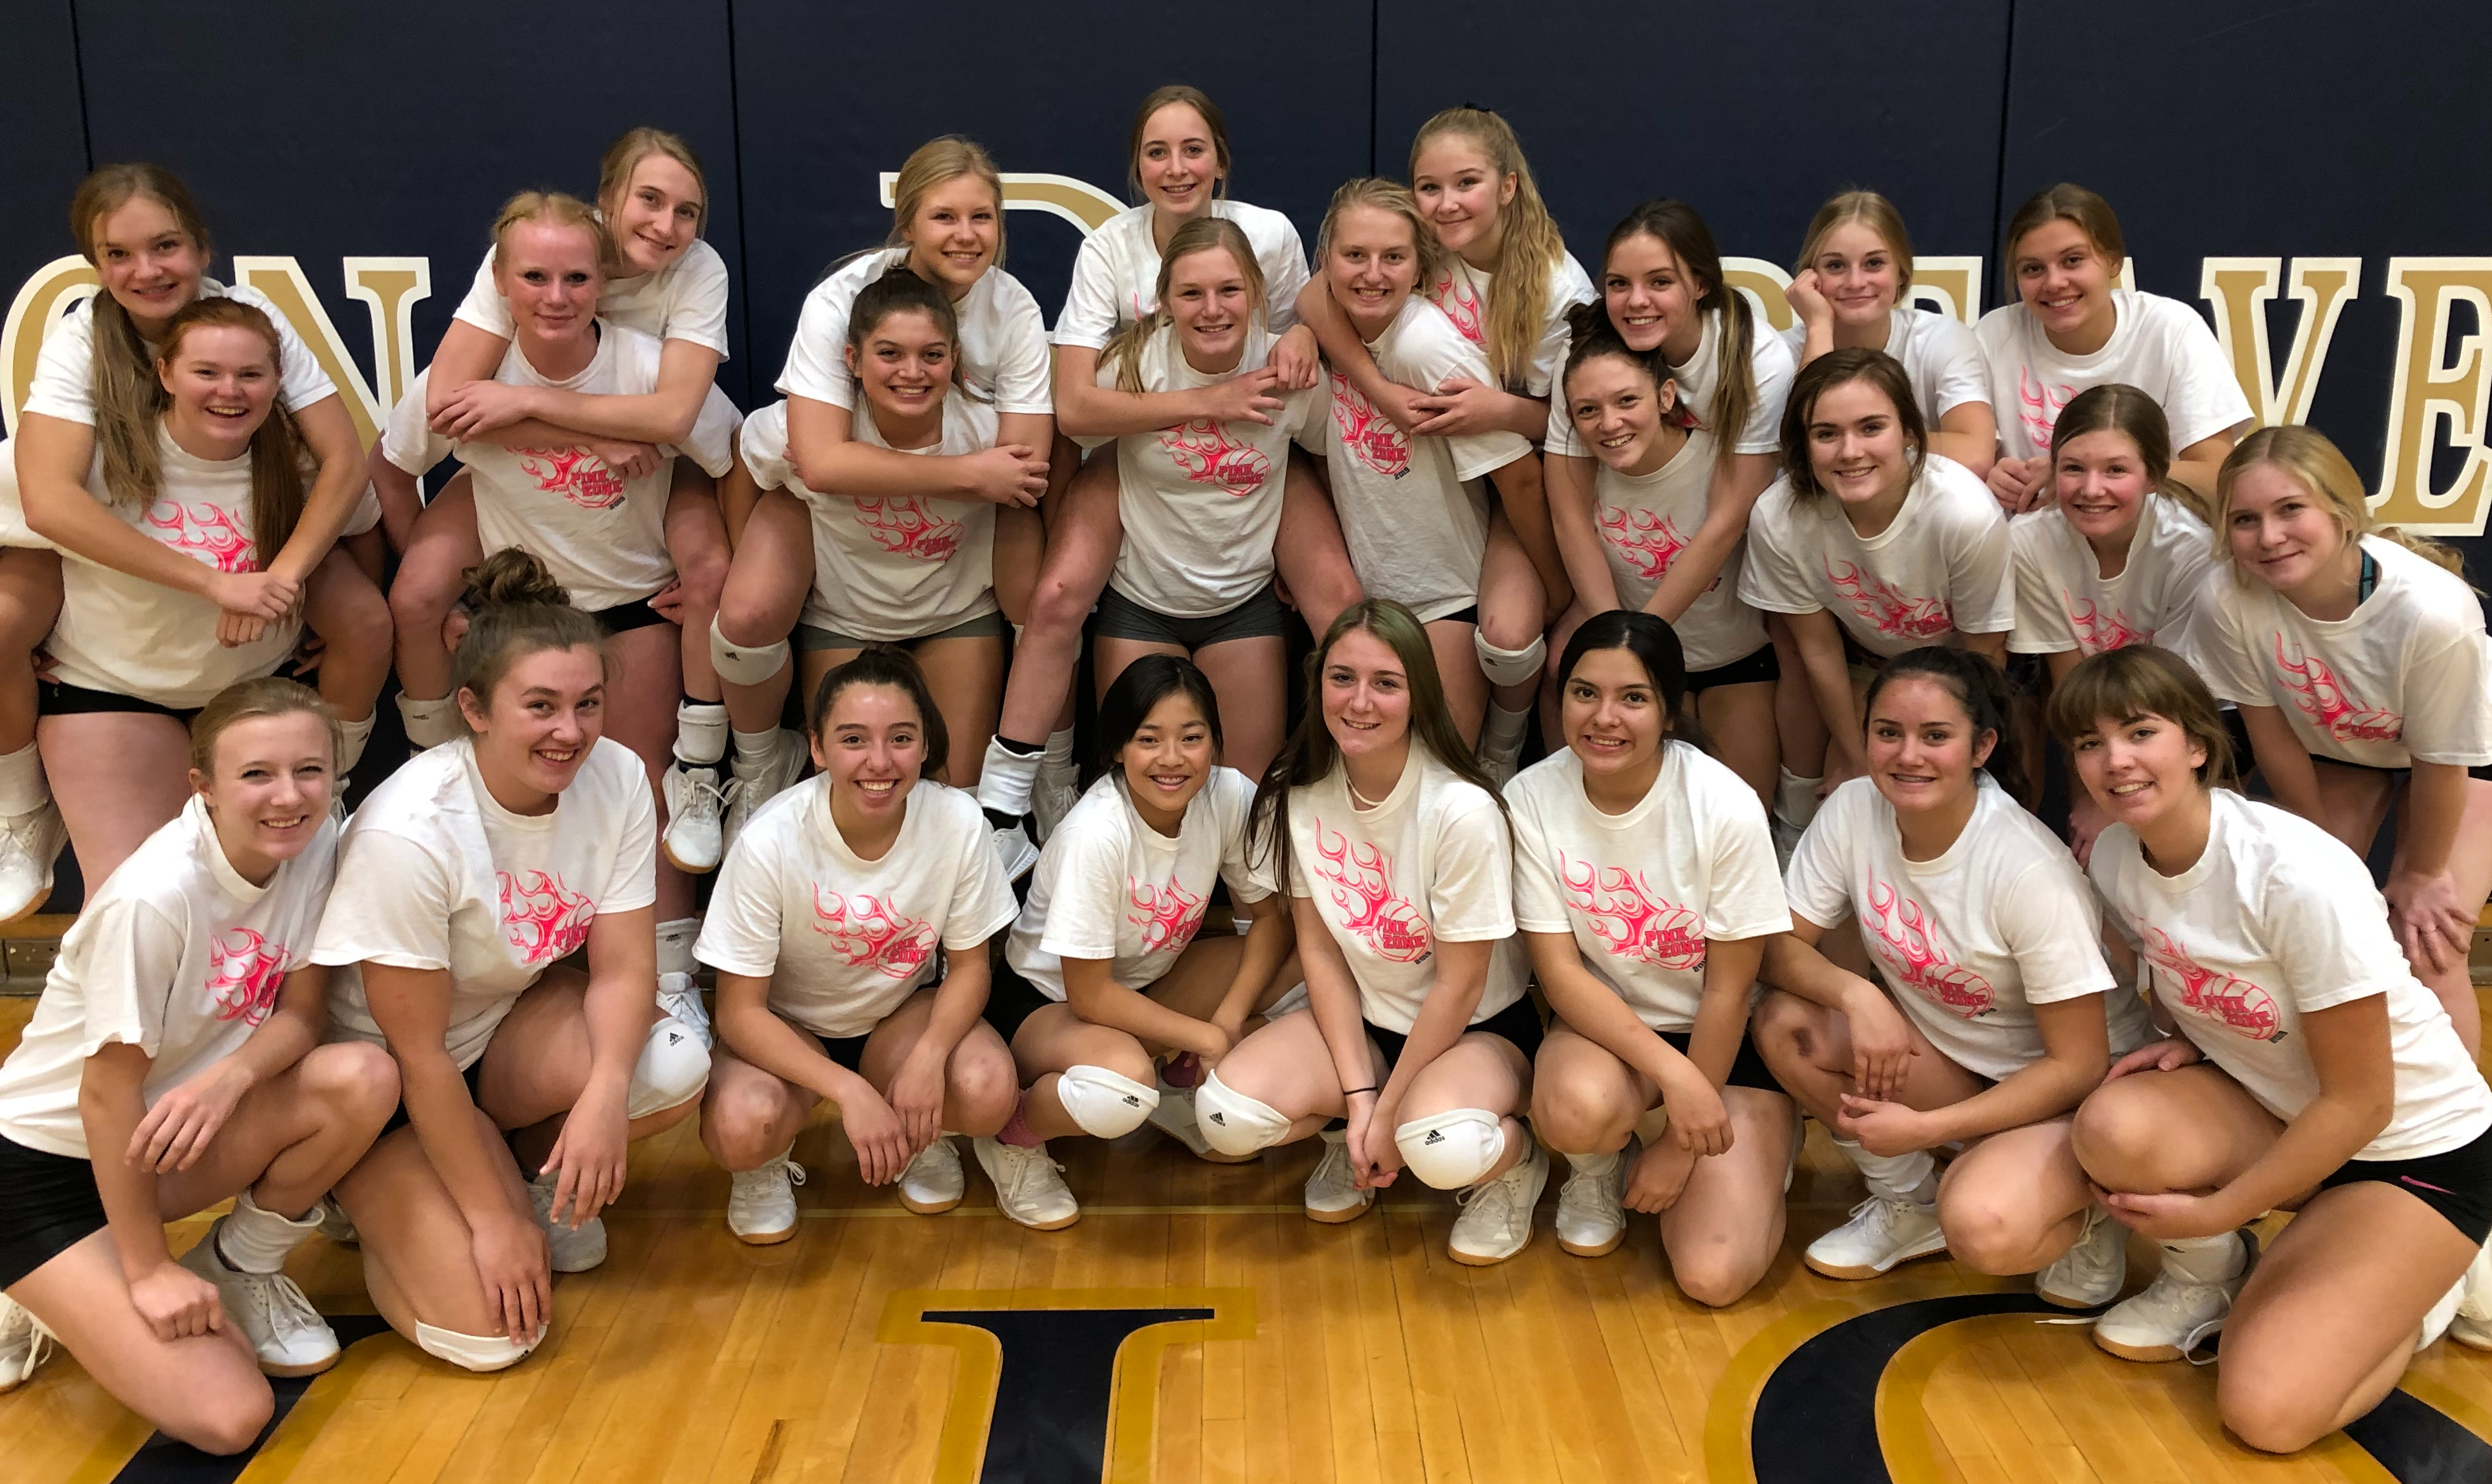 A photo of the volleyball team celebrating their Dig Pink match against Butte Central in October 2019